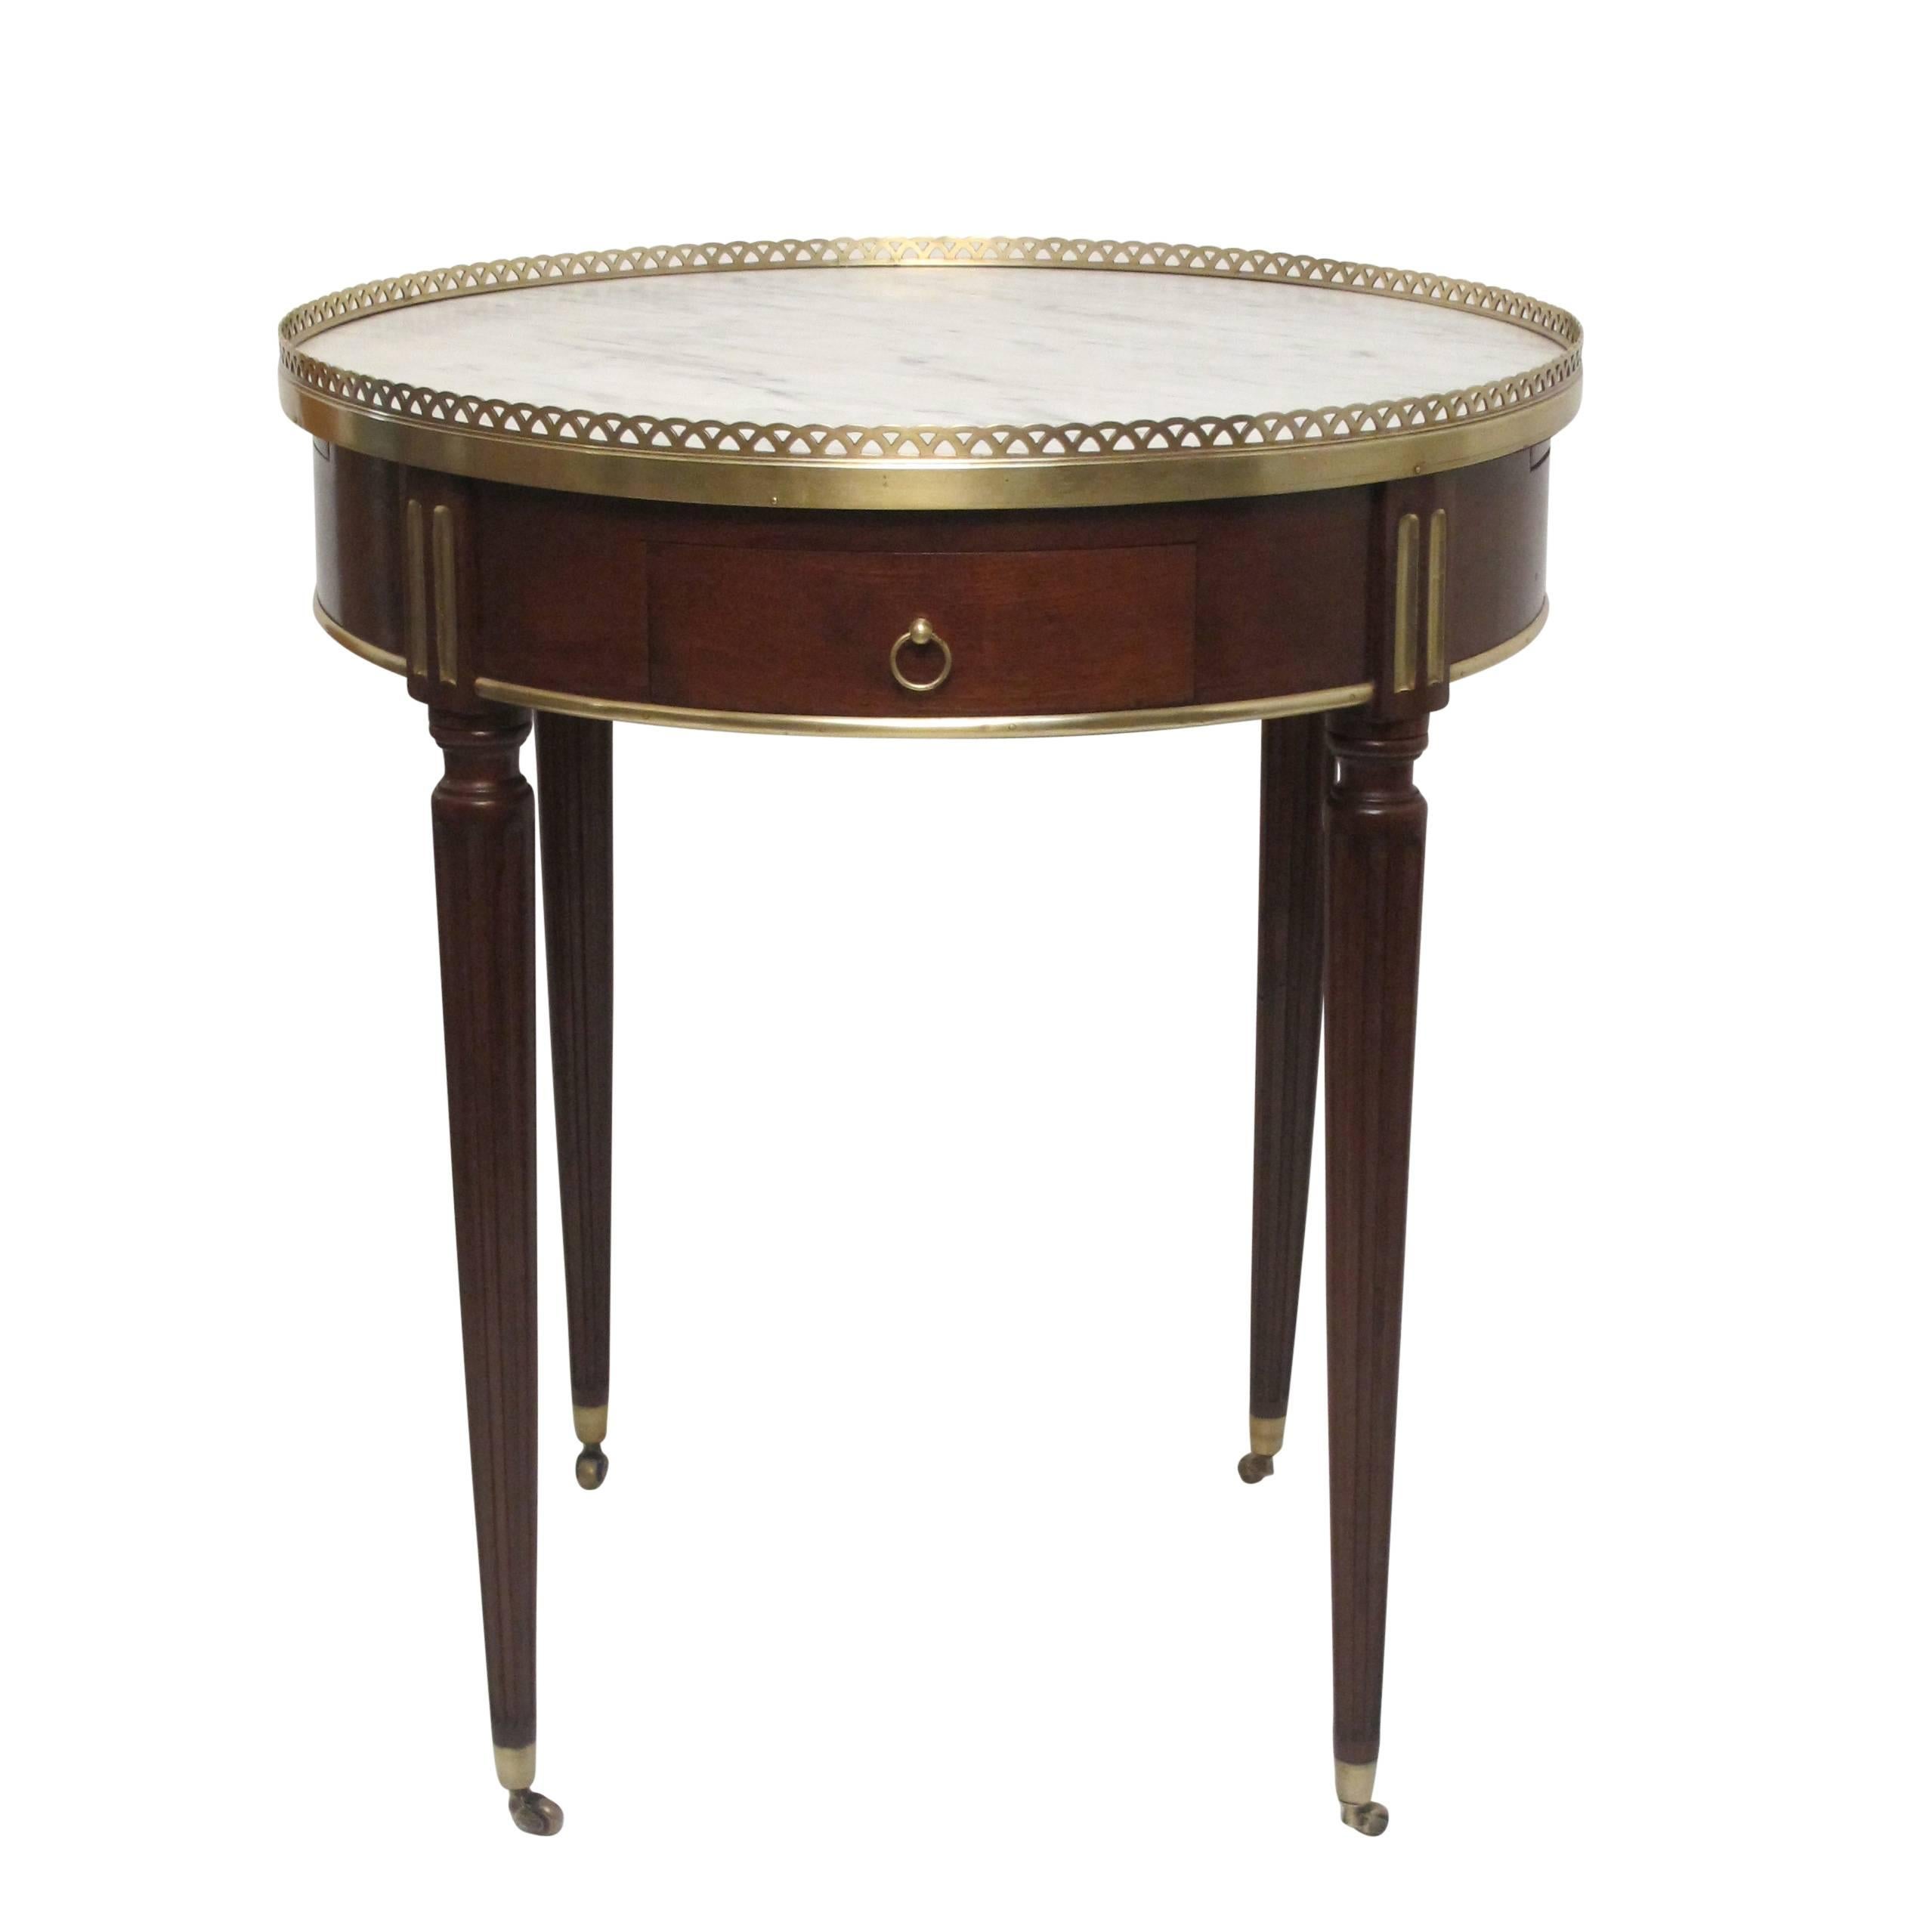 A Louis XV style mahogany bouillotte table, having a white marble top with gray veining, and a brass gallery. The table has two drawers and a pair of leather inlaid candle glides, France, mid-20th century, circa 1950.